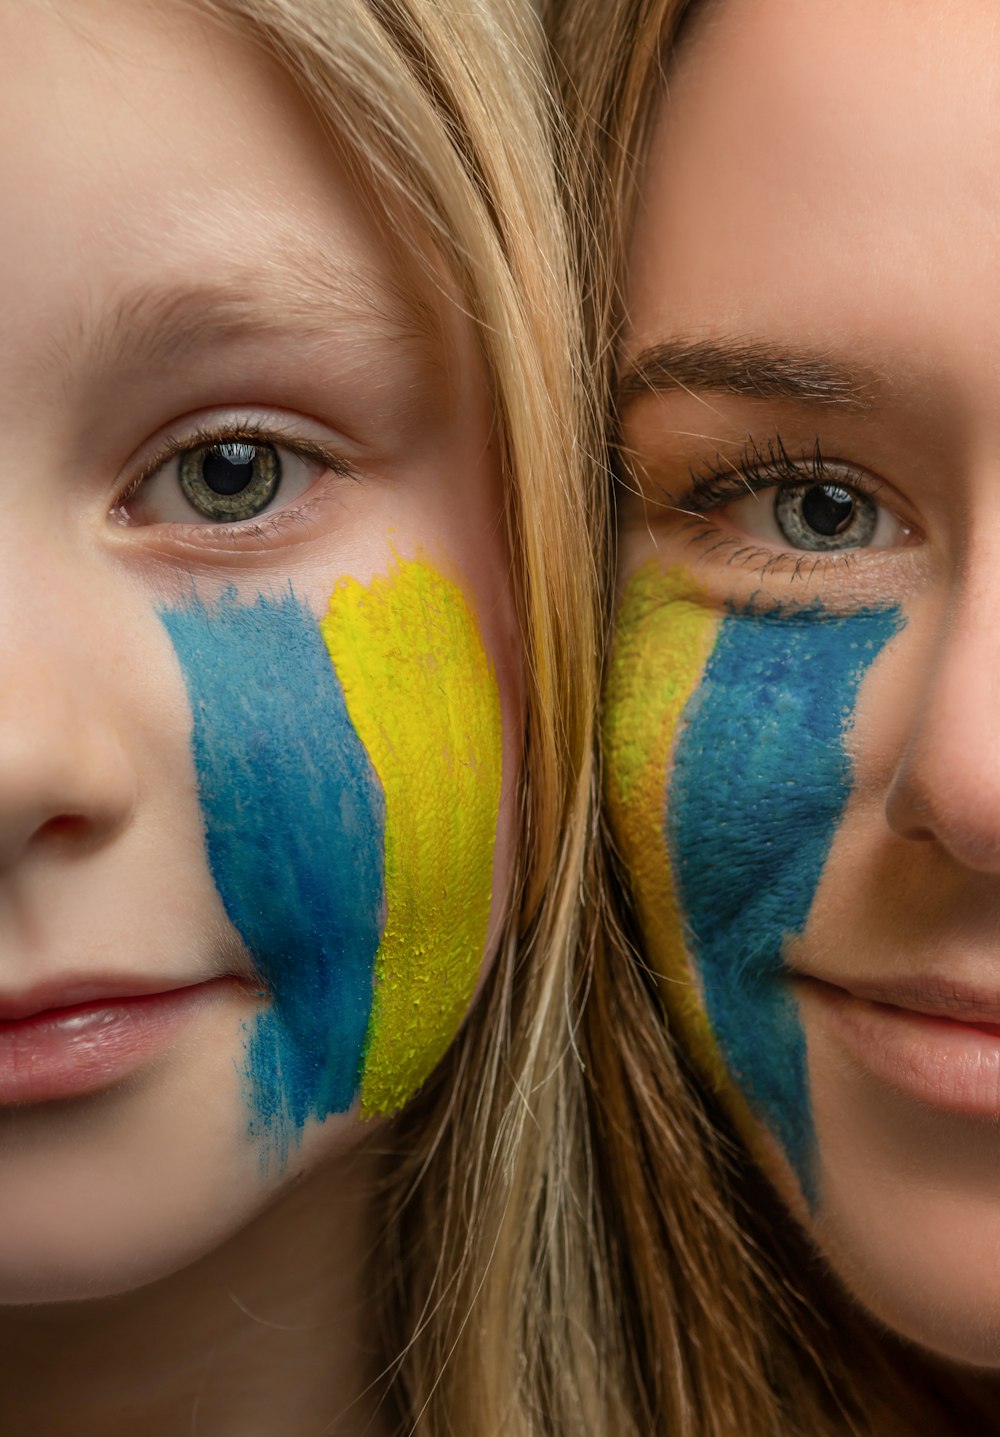 two girls with their faces painted in blue and yellow